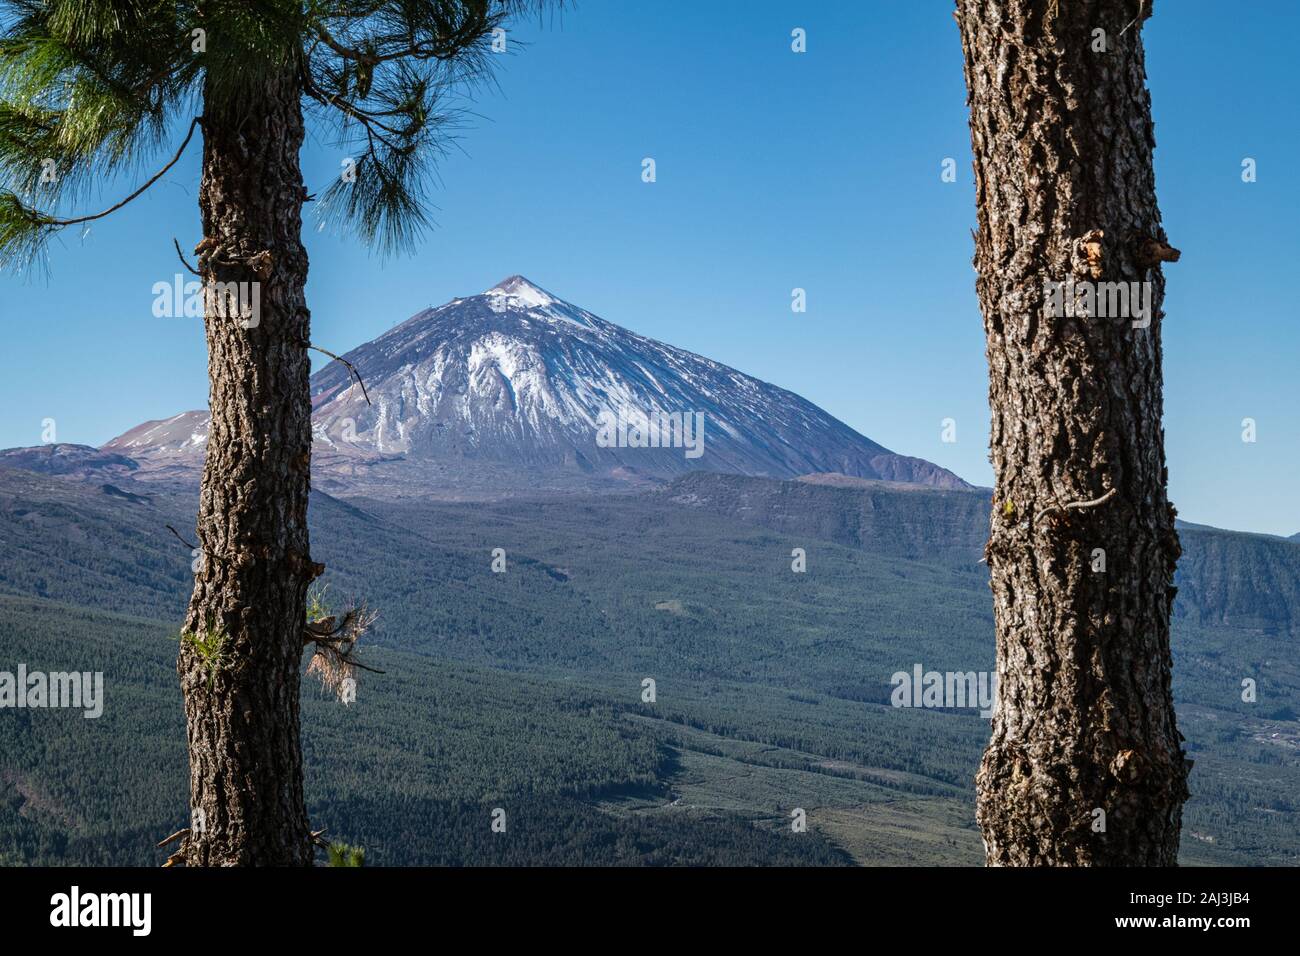 Peak of Mount Teide seen through pine trees from Mirador de Chipeque - one of the viewpoints along the La Esperanza road. Stock Photo